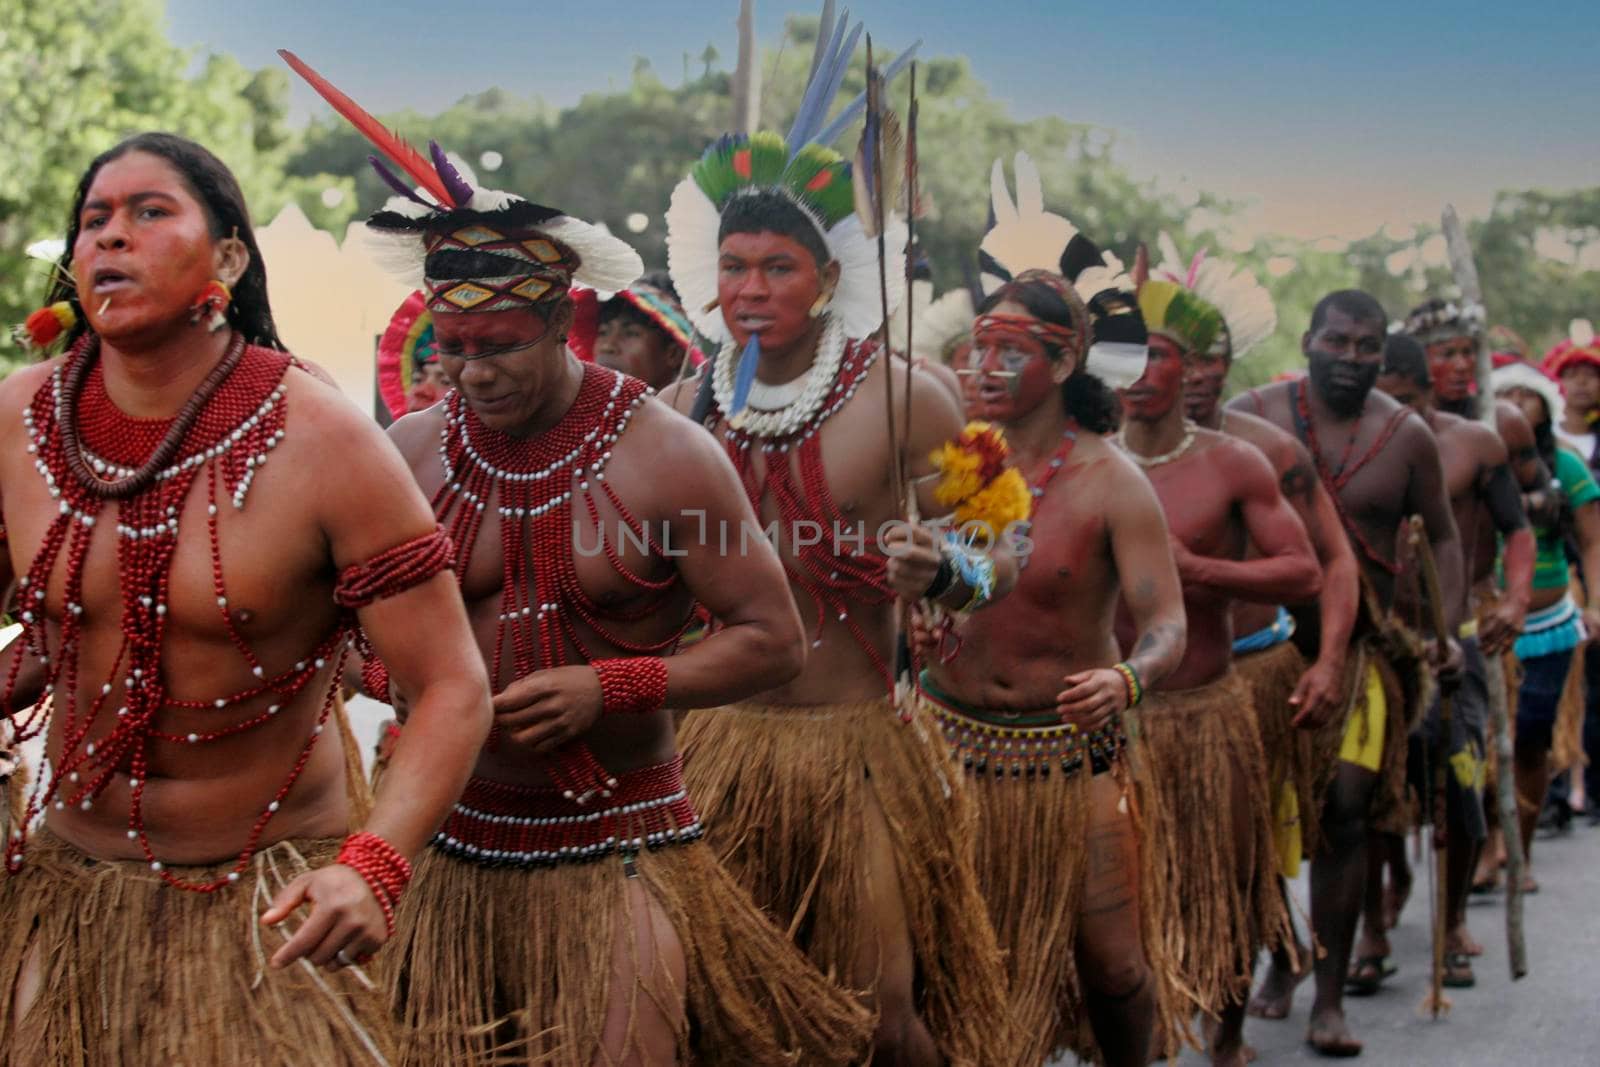 porto seguro, bahia, brazil - august 6, 2009: Indigenous people of ethnic Pataxo are seen during a protest on the BR 367 highway in the city of Porto Seguro.